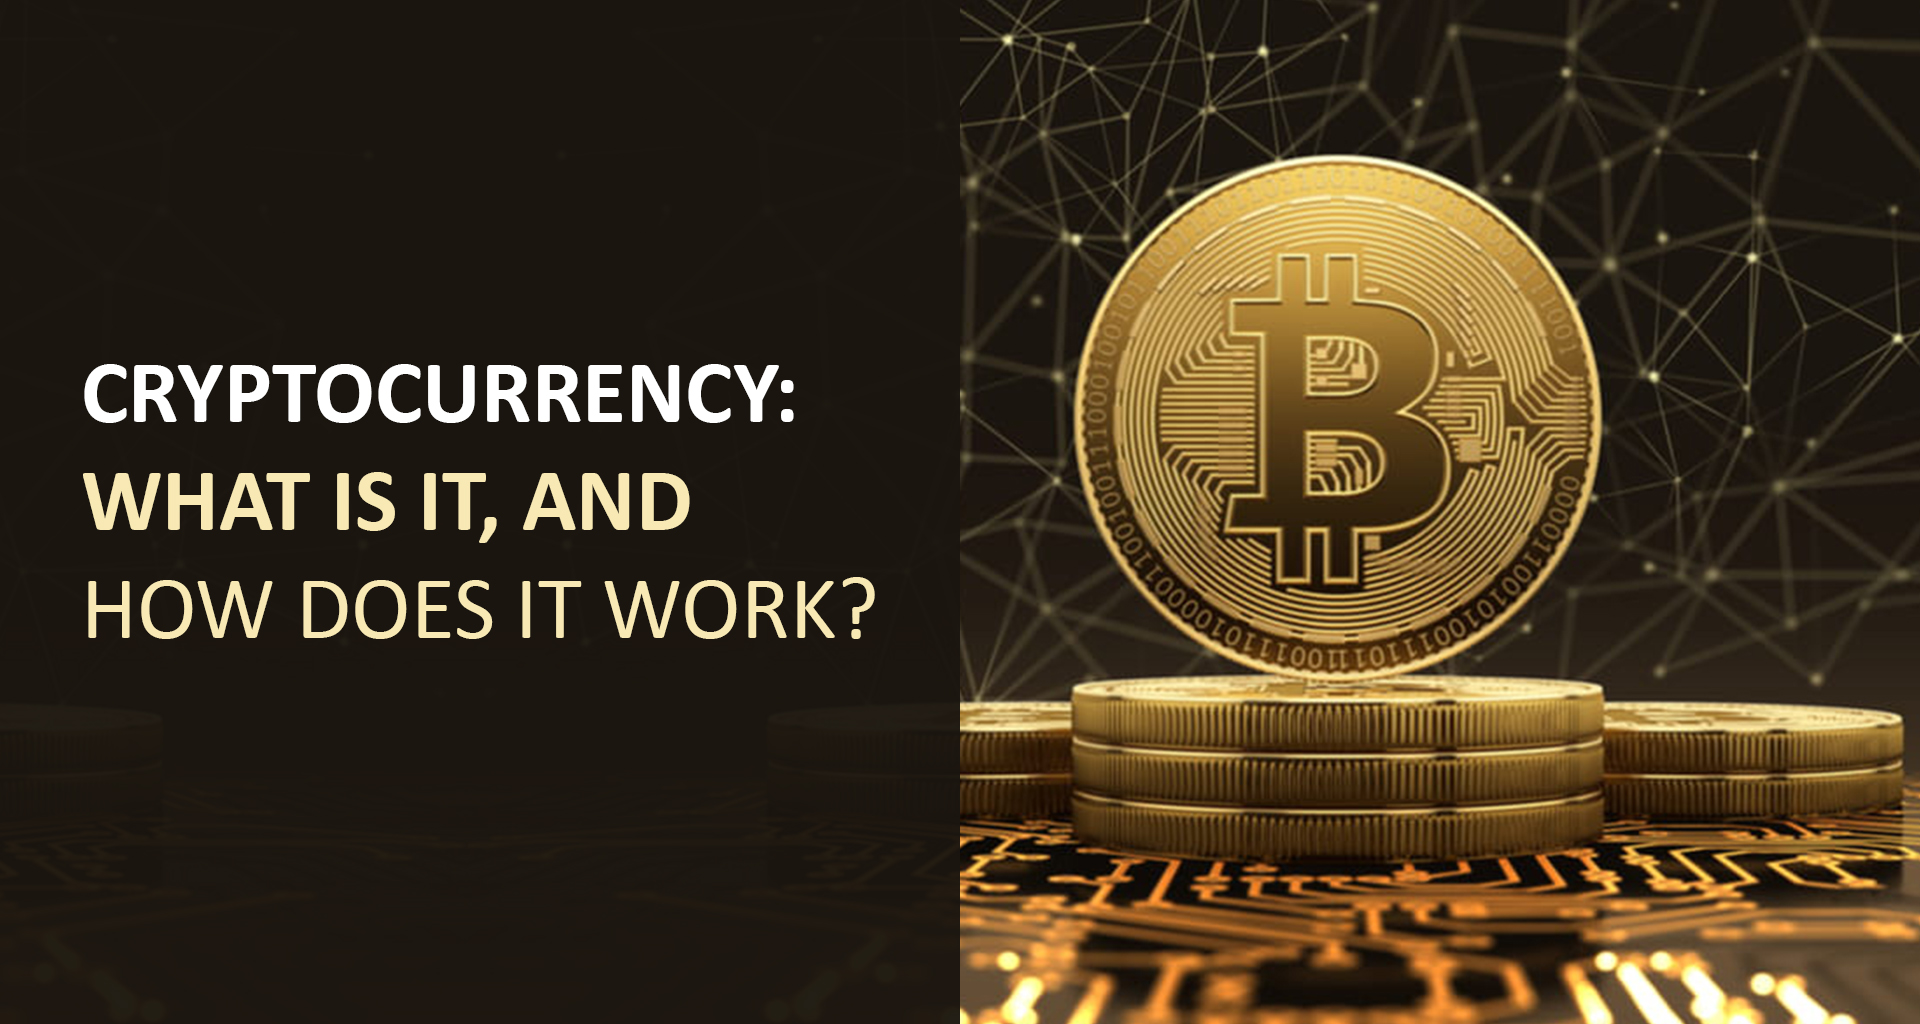 Cryptocurrency what is it, and how does it work